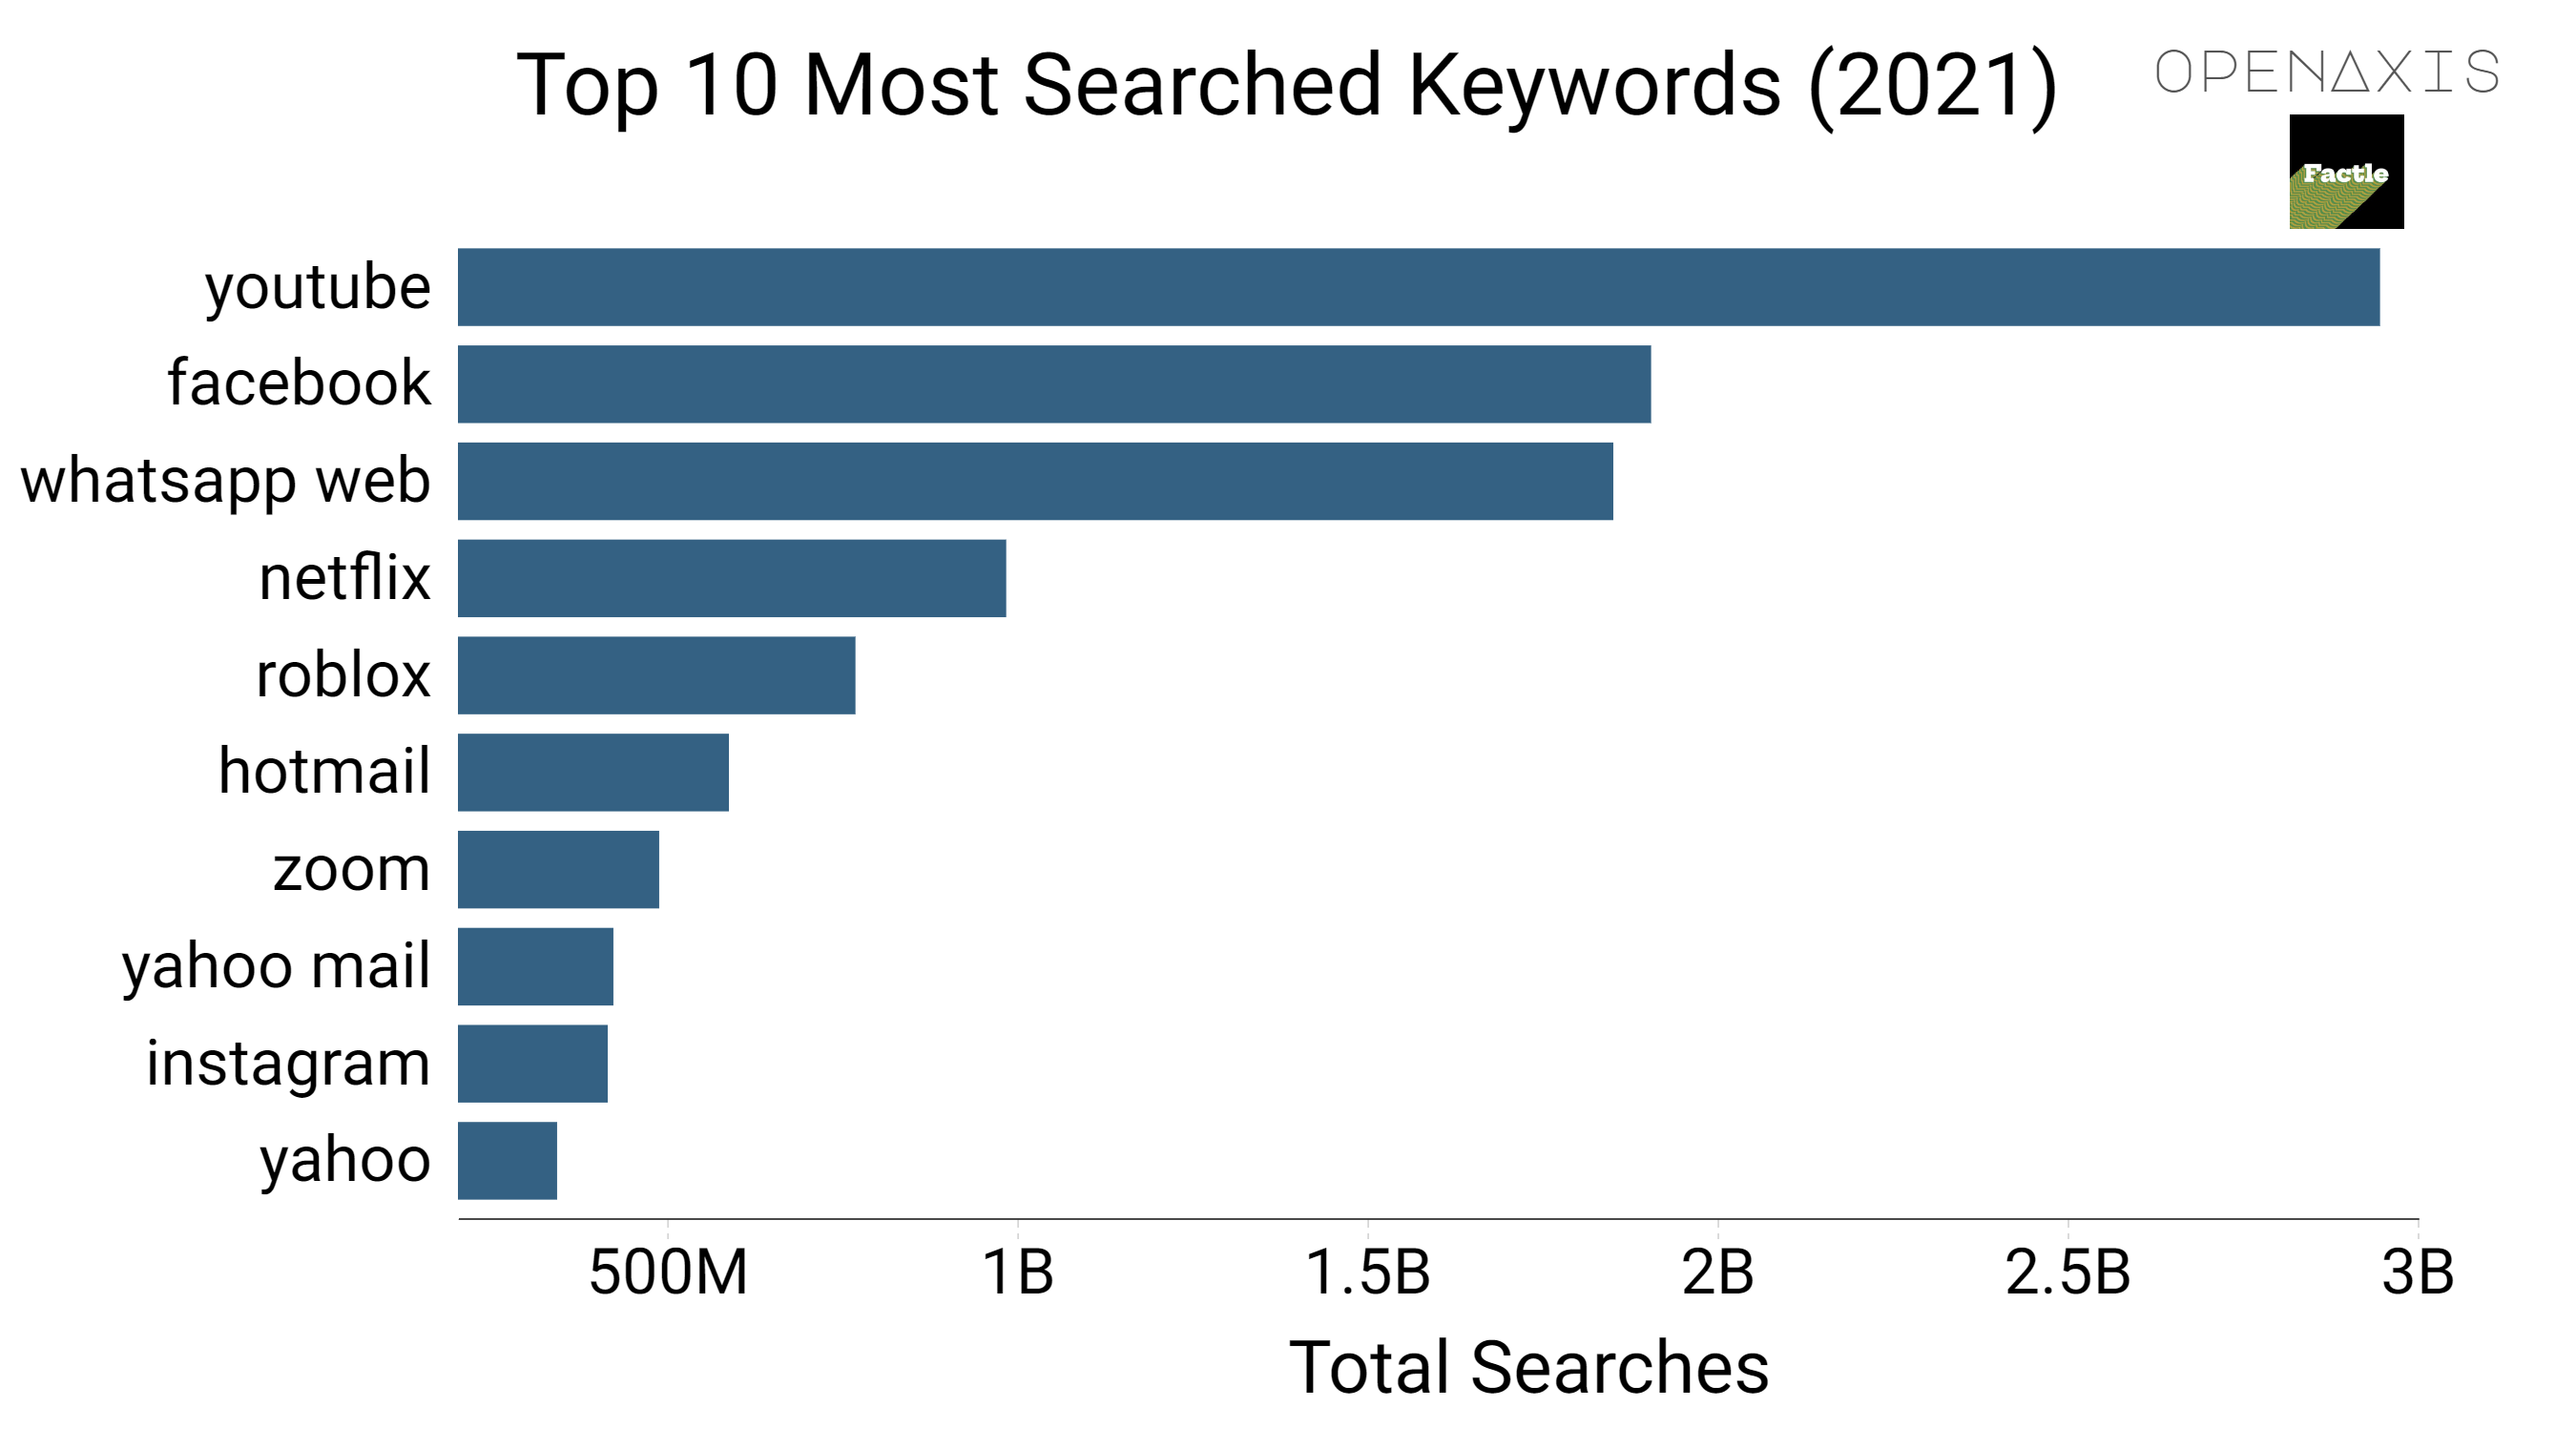 "Top 10 Most Searched Keywords (2021)"